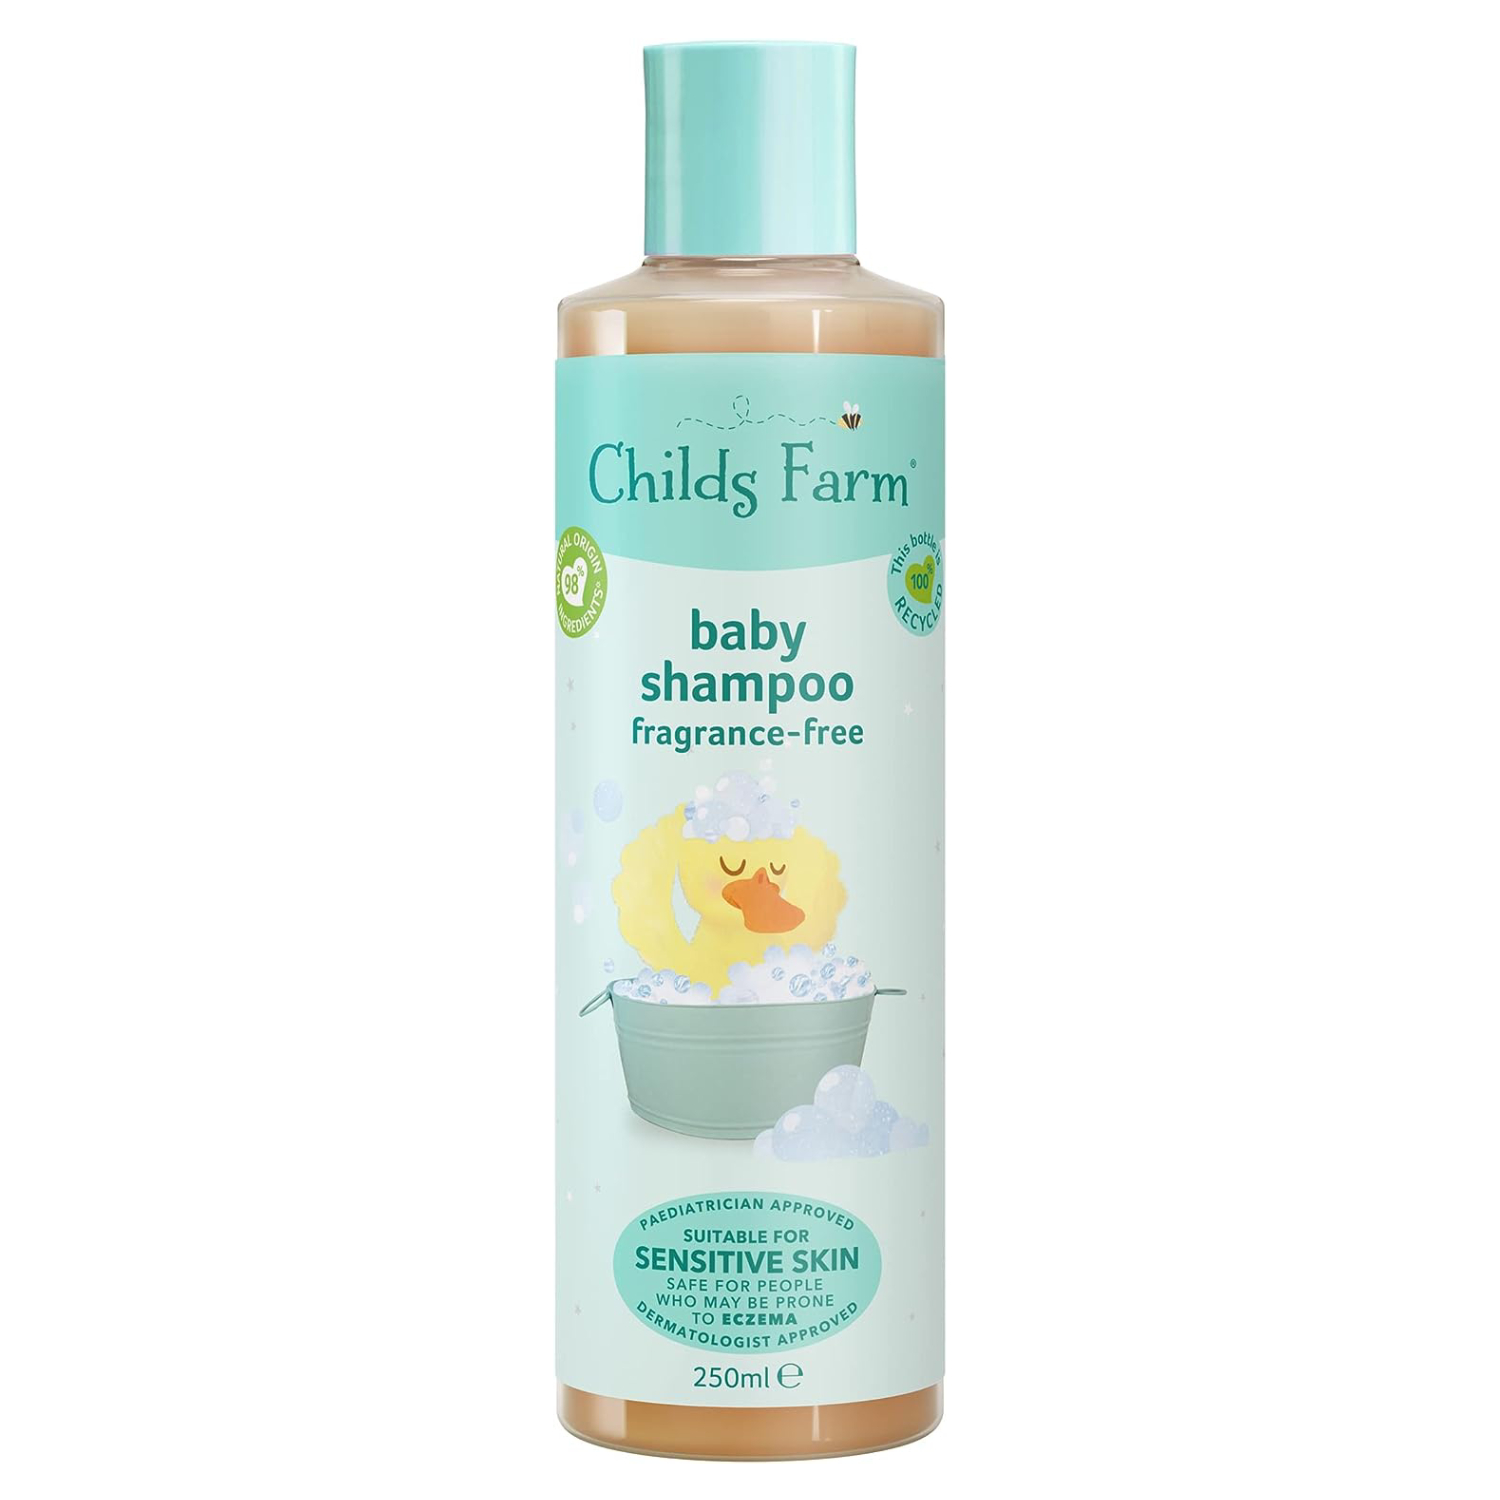 Product Image for Childs Farm Baby Shampoo, unfragranced 250ml